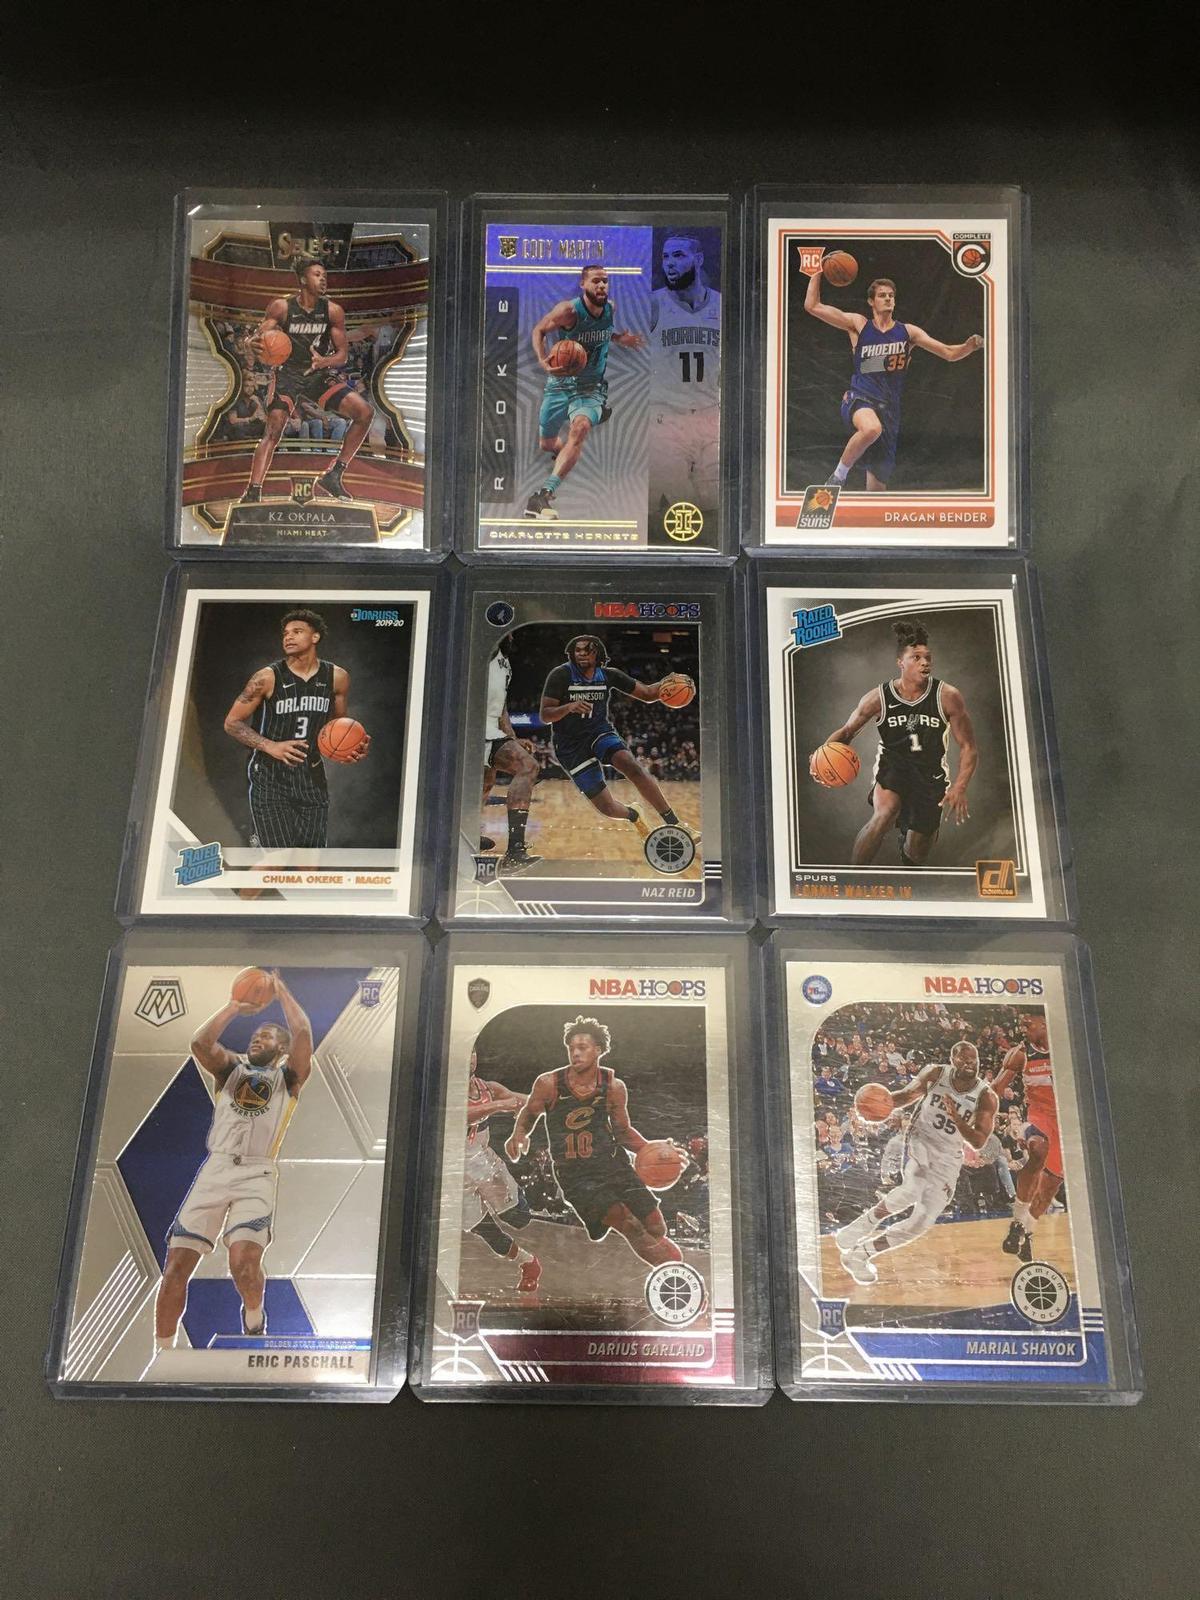 9 Card Lot of Basketball ROOKIE Cards - Mostly Modern Years - Prizms, Future Stars and More!